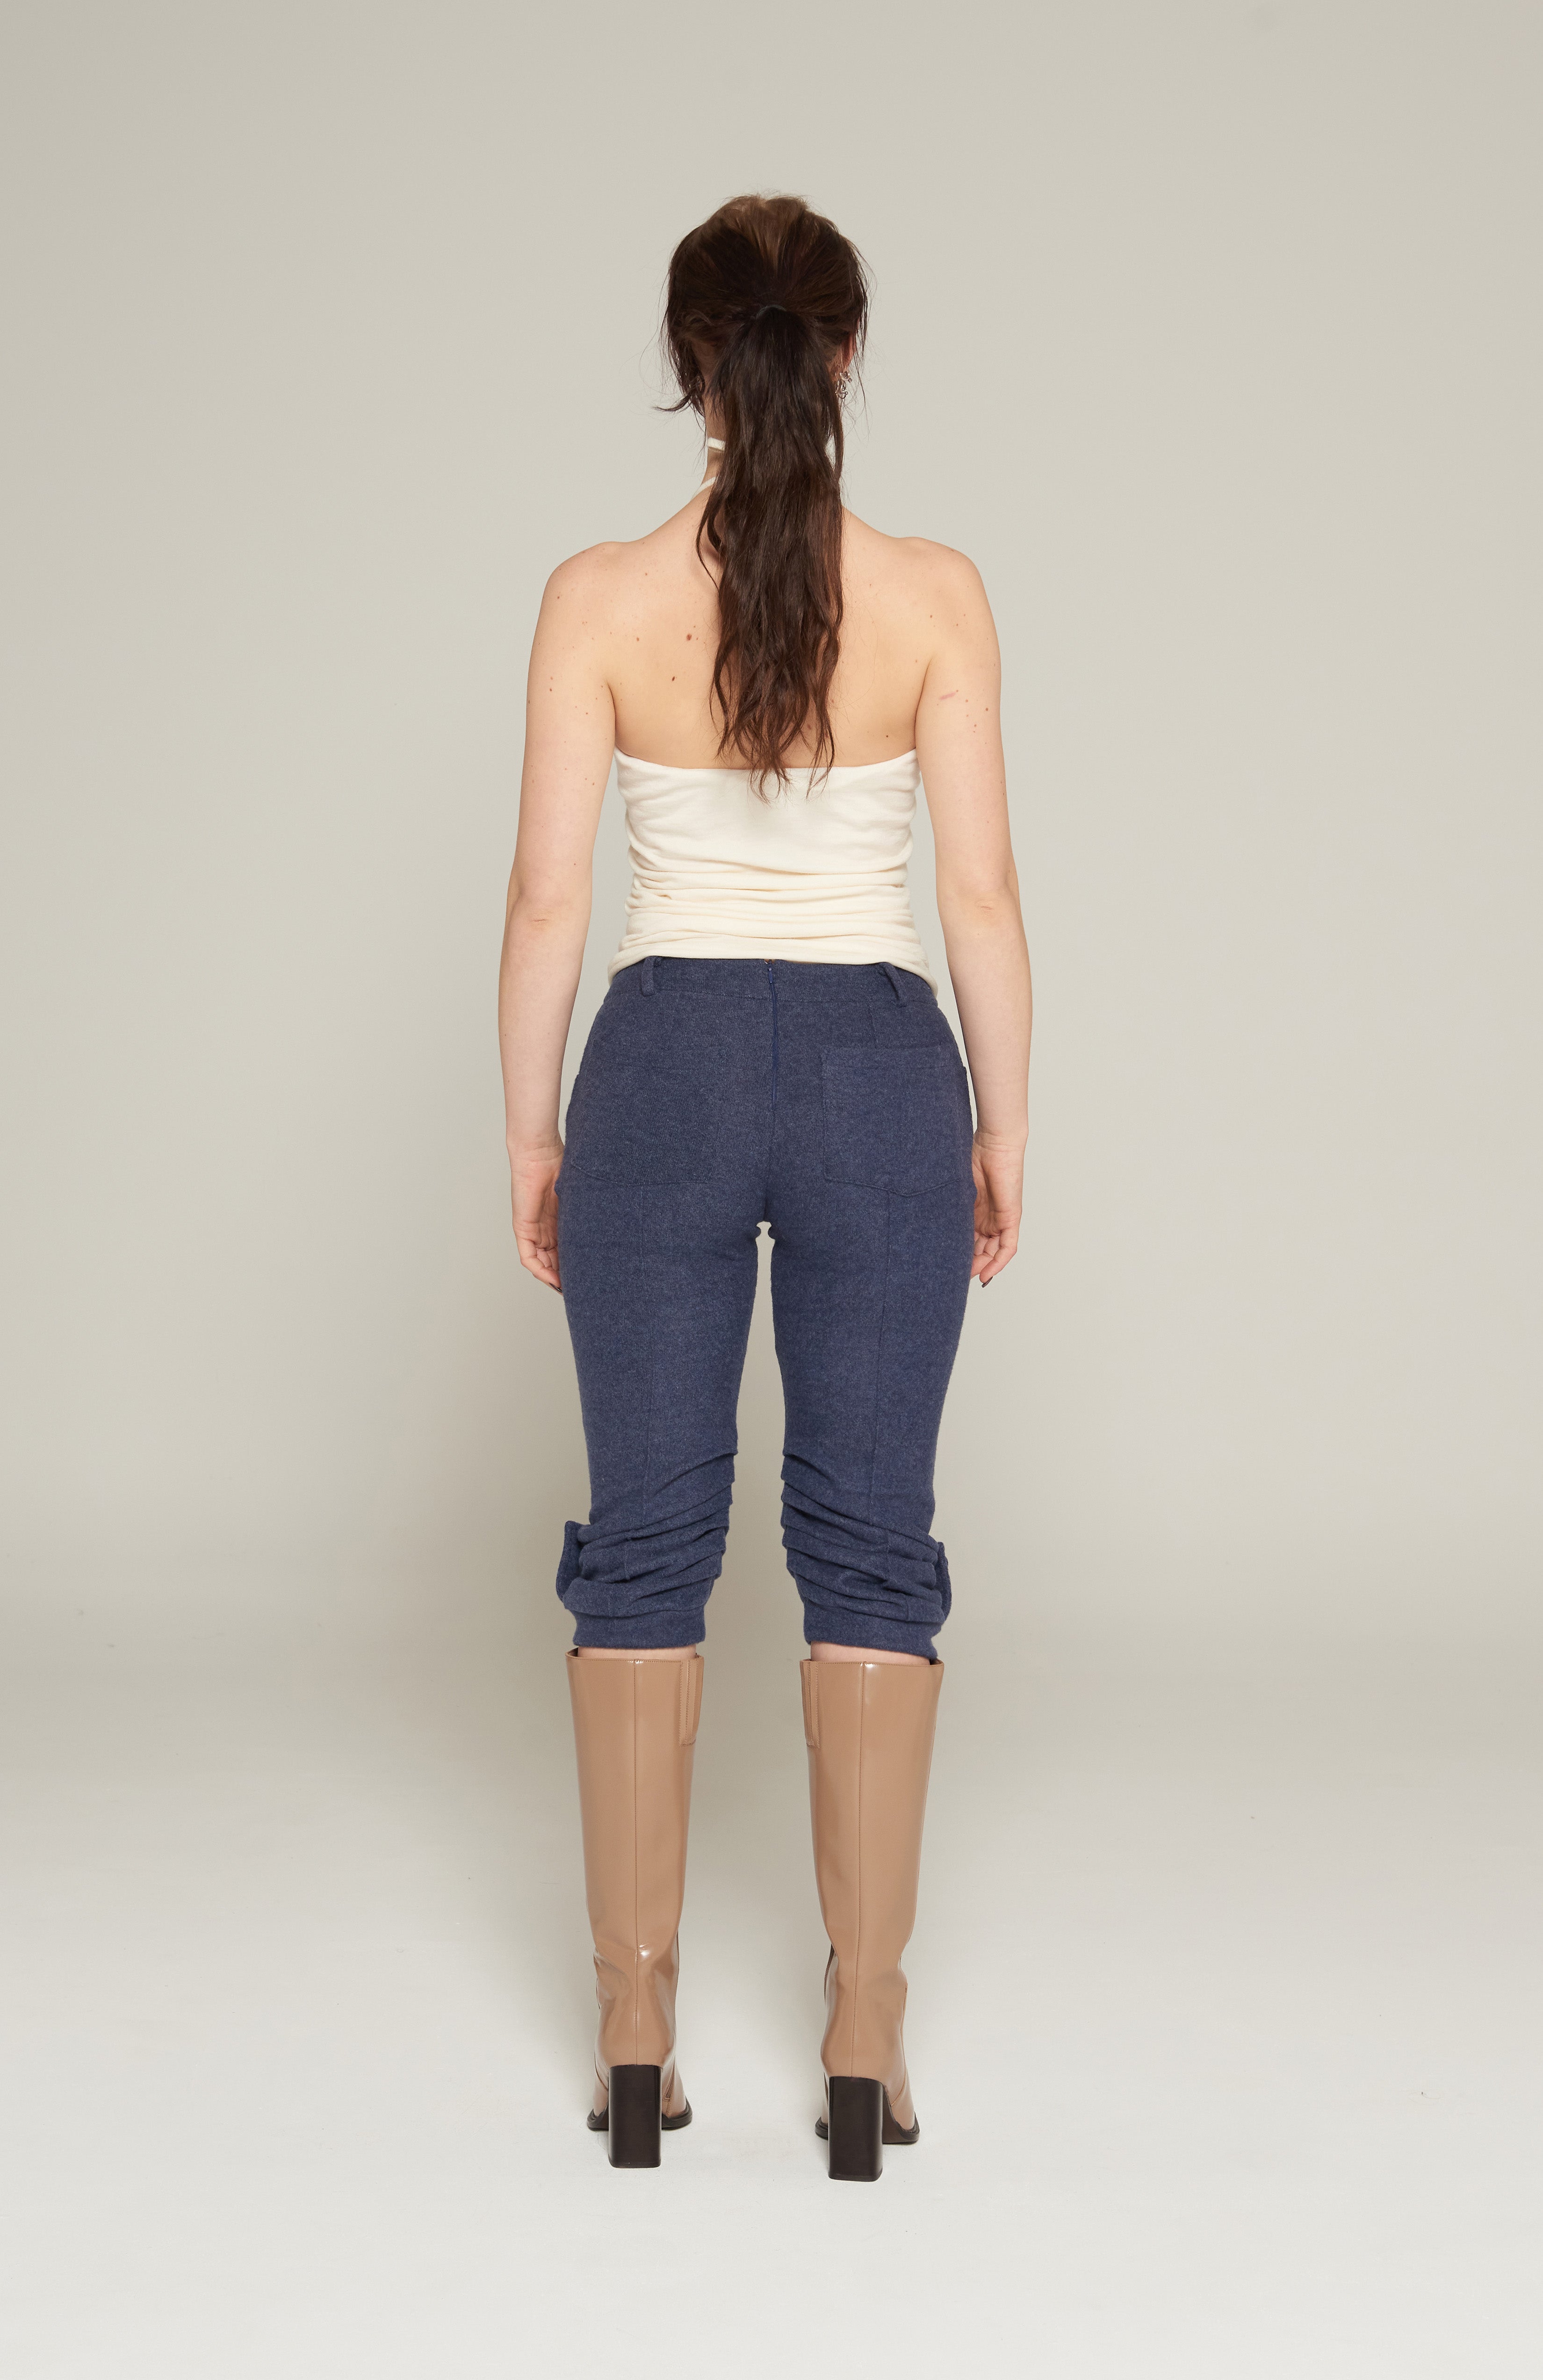 Mid waisted 3/4 capri pants in brushed ink marl. Jean style front pockets with back patch pockets. Features front and back pintucks with gathers at the calf. Aviator epaulette tabs at leg cuffs secured with self covered mushroom buttons. Tidy centre back zip closure and belt loops.